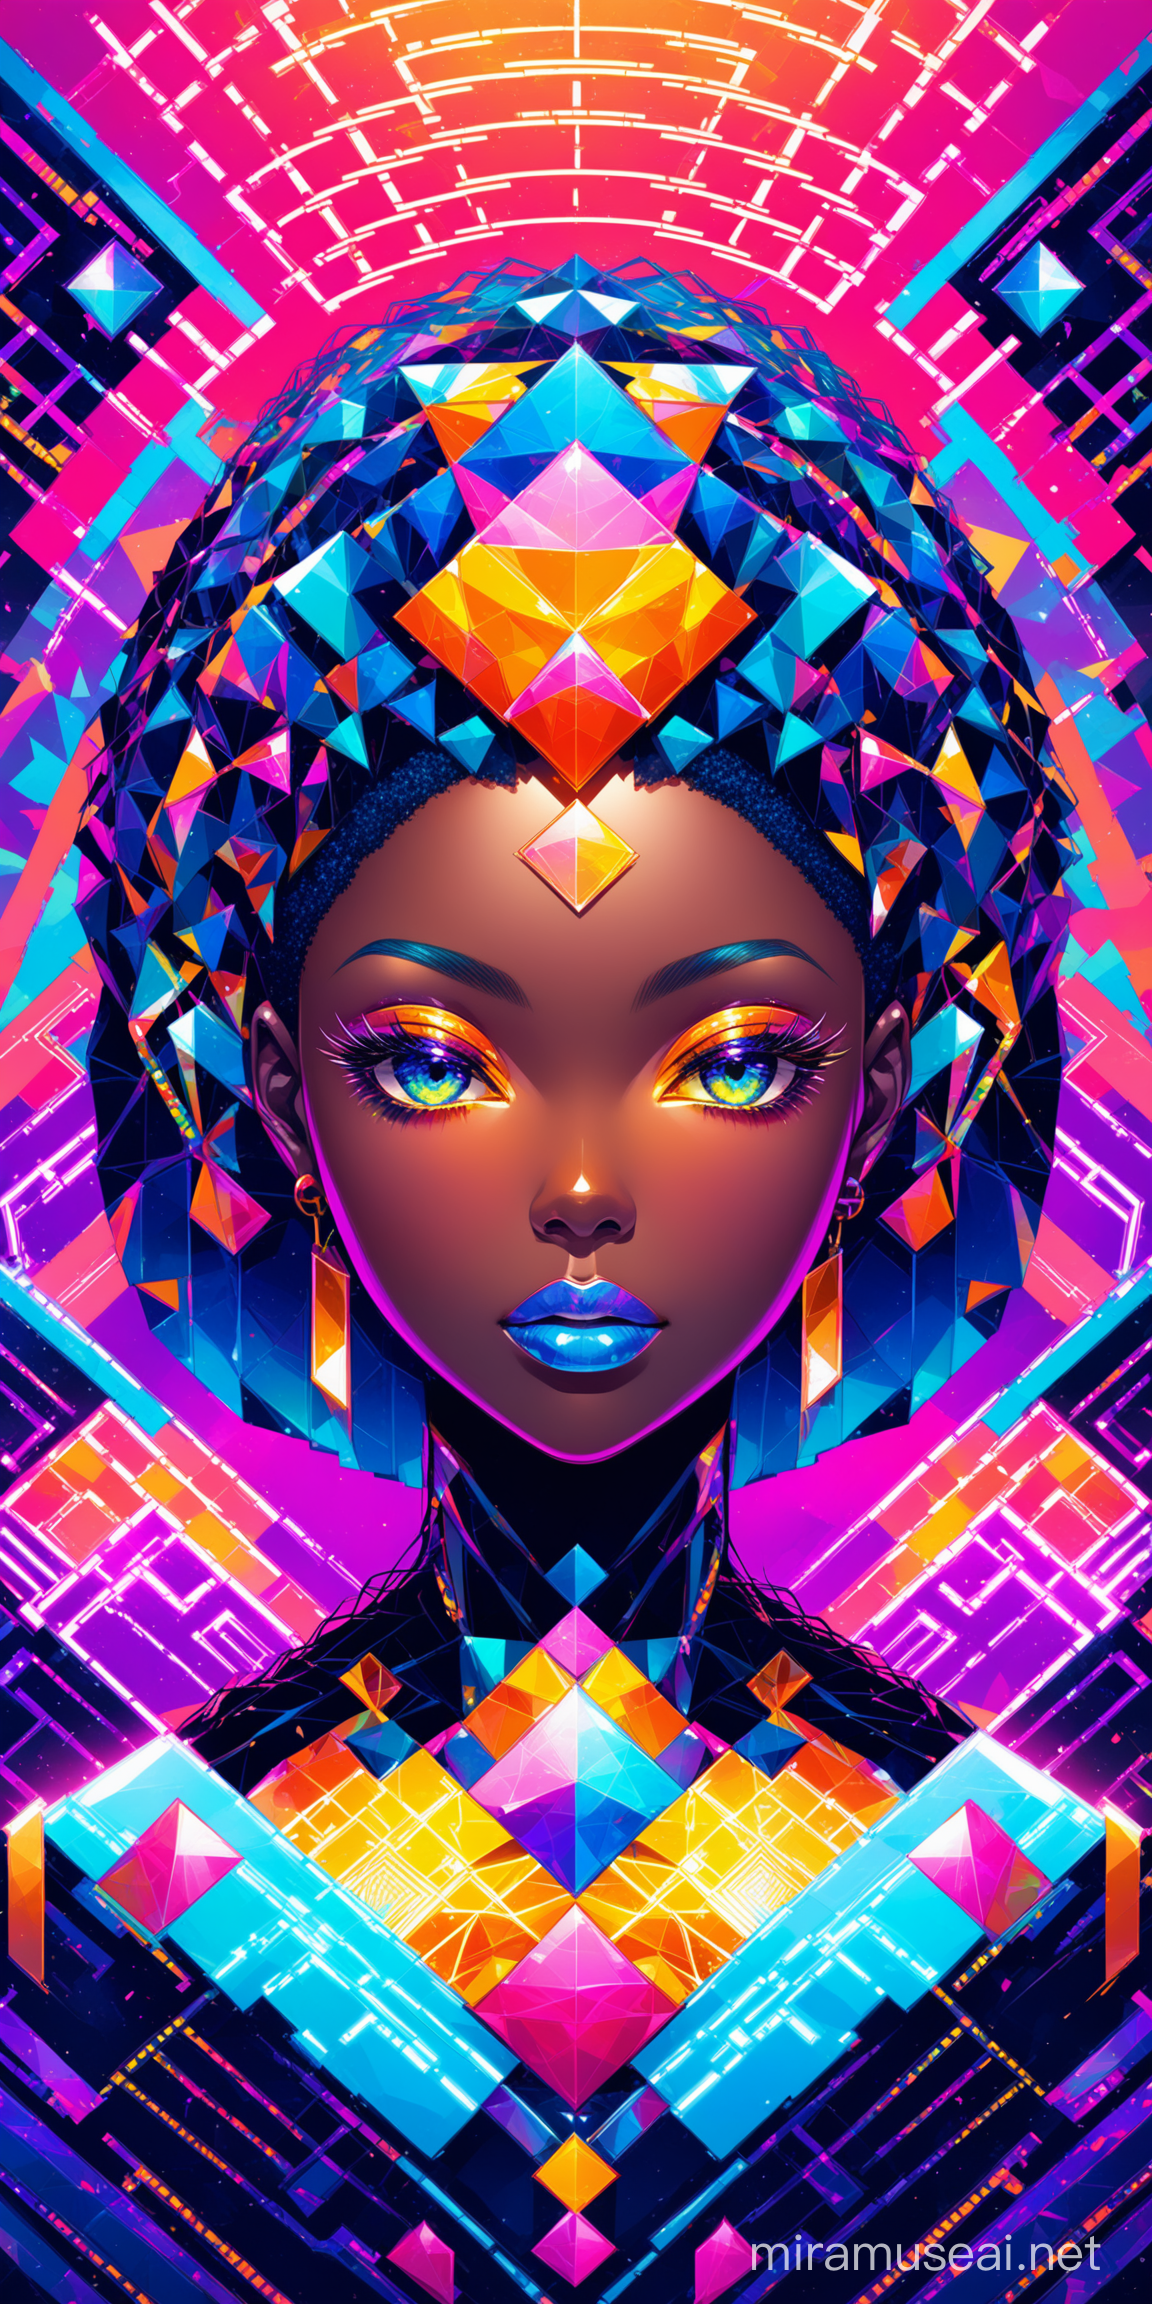 Envision an Afrocentric portrait that is electric with sapphire hair, influenced by the collage style of Soejima Shigenori and the architectural philosophy of Futuristic Deconstructivism. This surreal portrait weaves together textured aluminum and geometric icons in a dream-like scenario, enriched with hyper-detailed elements and neon colors. The artwork skillfully blends the digital precision of geometric shapes with the natural flow of sapphire hair, set against a backdrop that captures the essence of surrealism. It's distinguished by a vivid neon color scheme, which forms a sharp contrast against the metallic textures, enhancing its futuristic appeal. This unique combination of elements forms a visually stunning piece that challenges the conventions of traditional portraiture, infusing it with a vibrant Afrocentric energy.